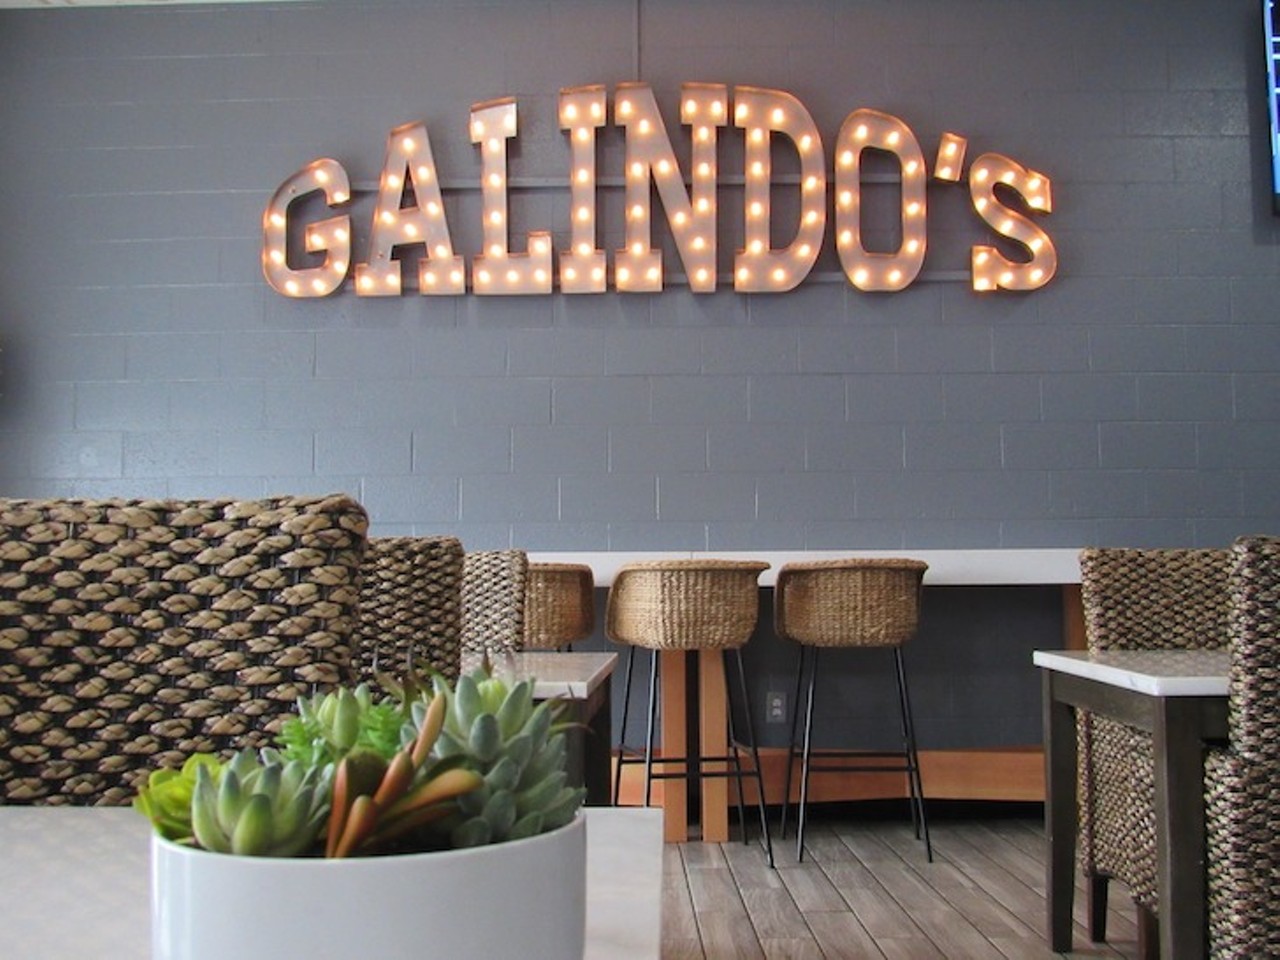 Galindo’s
13754 Fort St., Southgate; 734-324-1141; galindosmexican.com
Galindo’s offers a taste of Mexican street food cuisine in a relaxed and casual atmosphere.